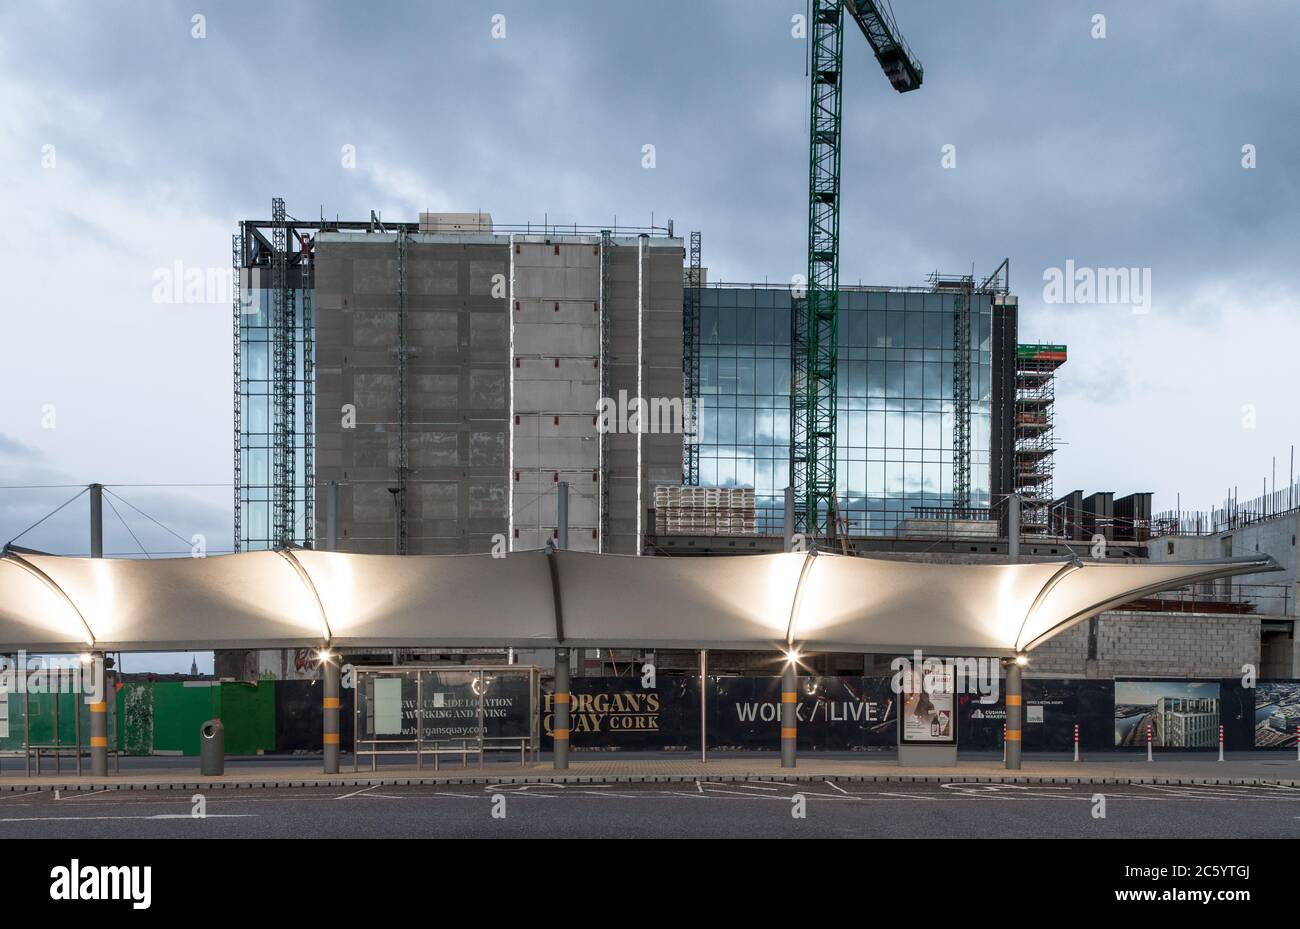 Cork City, Cork, Ireland. 06th July, 2020. A view of a section of the new Horgan's Quay development which is still under construction from the car park of Kent Station in Cork City, Cork, Ireland. - Credit; David Creedon / Alamy Live News Stock Photo